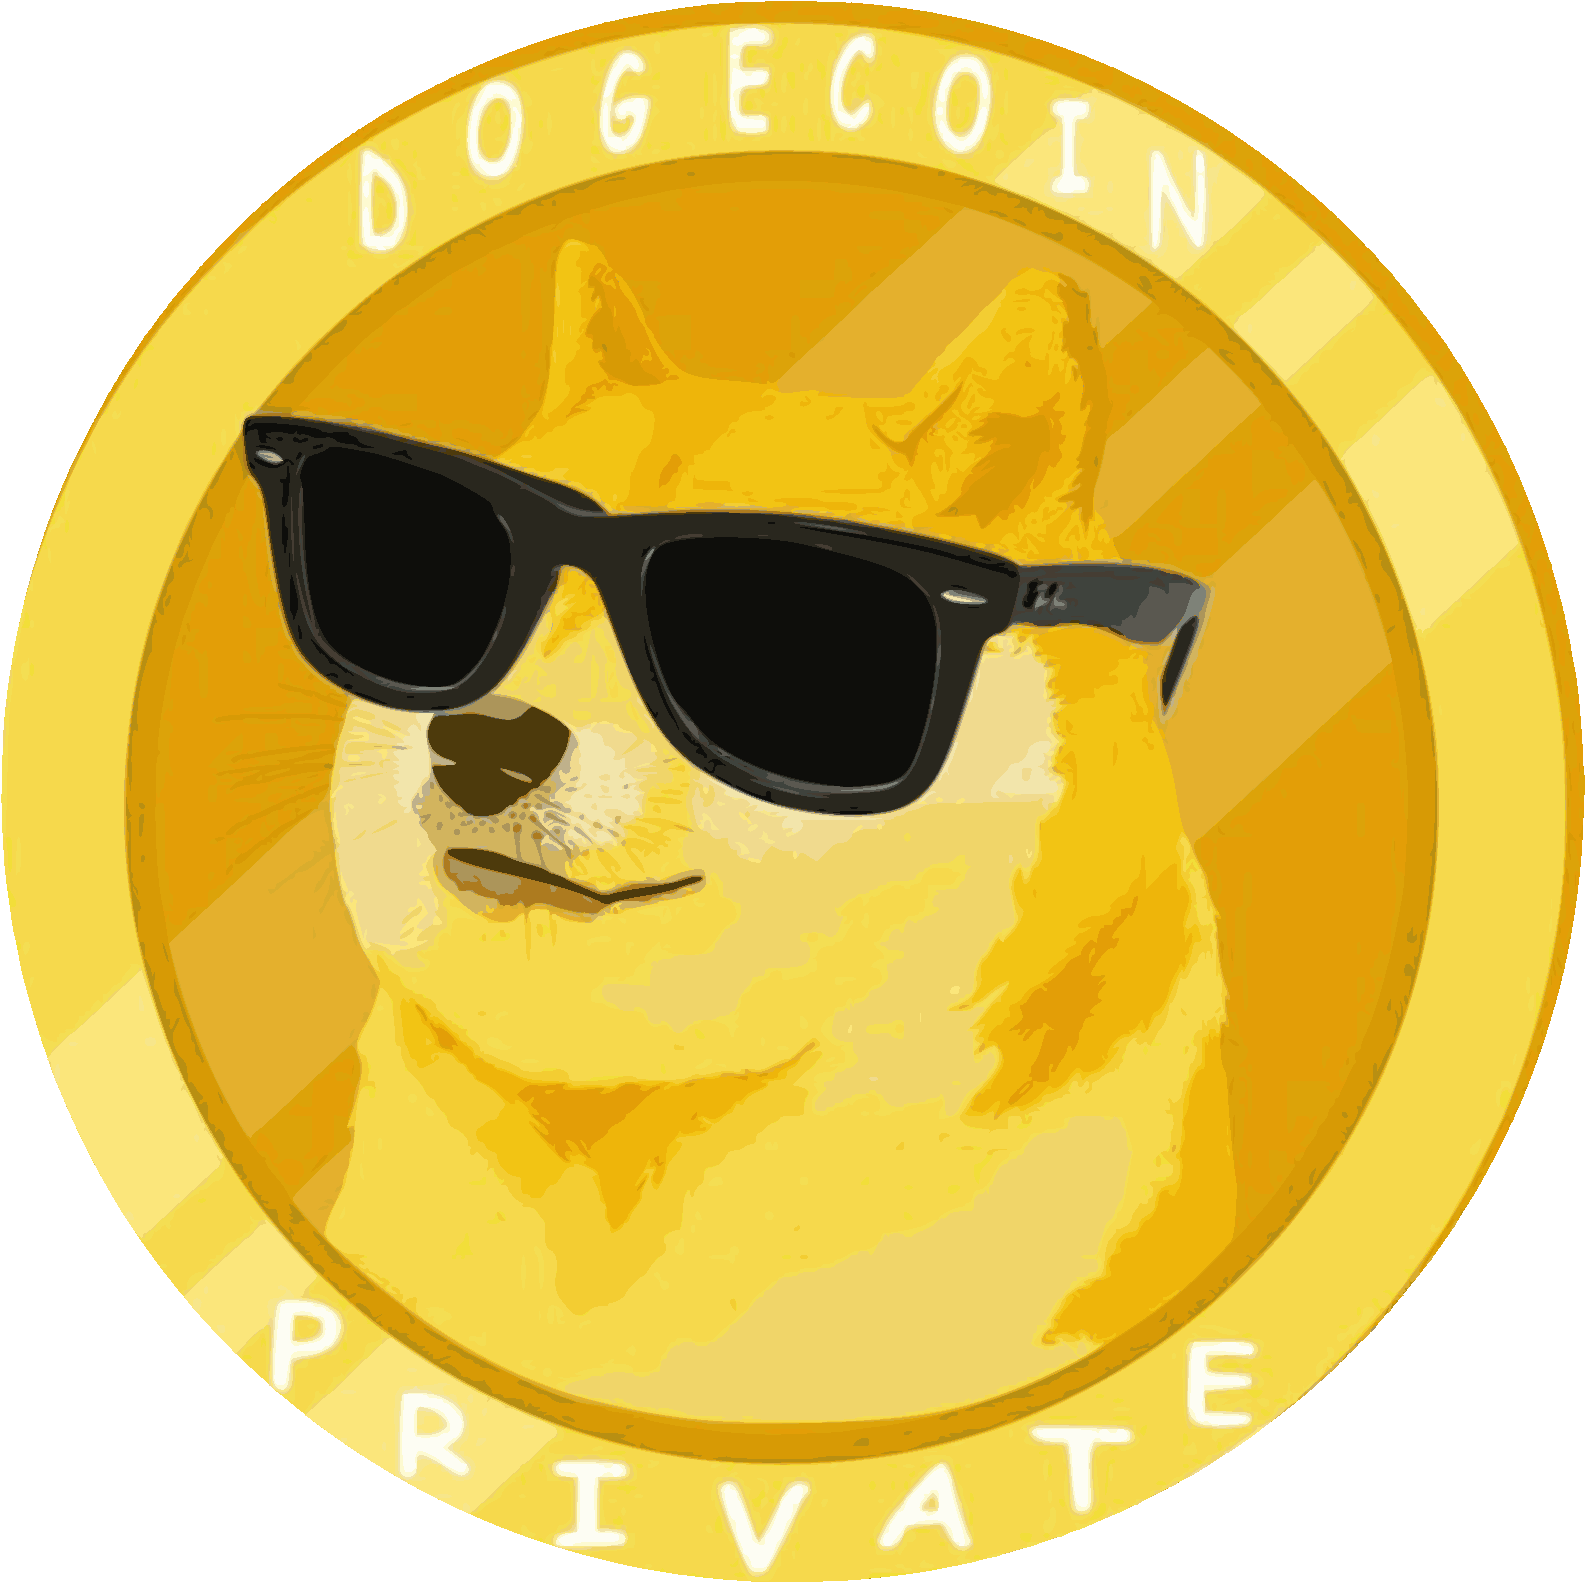 Dogecoin Private Cool Shiba Inu Coin Design PNG image